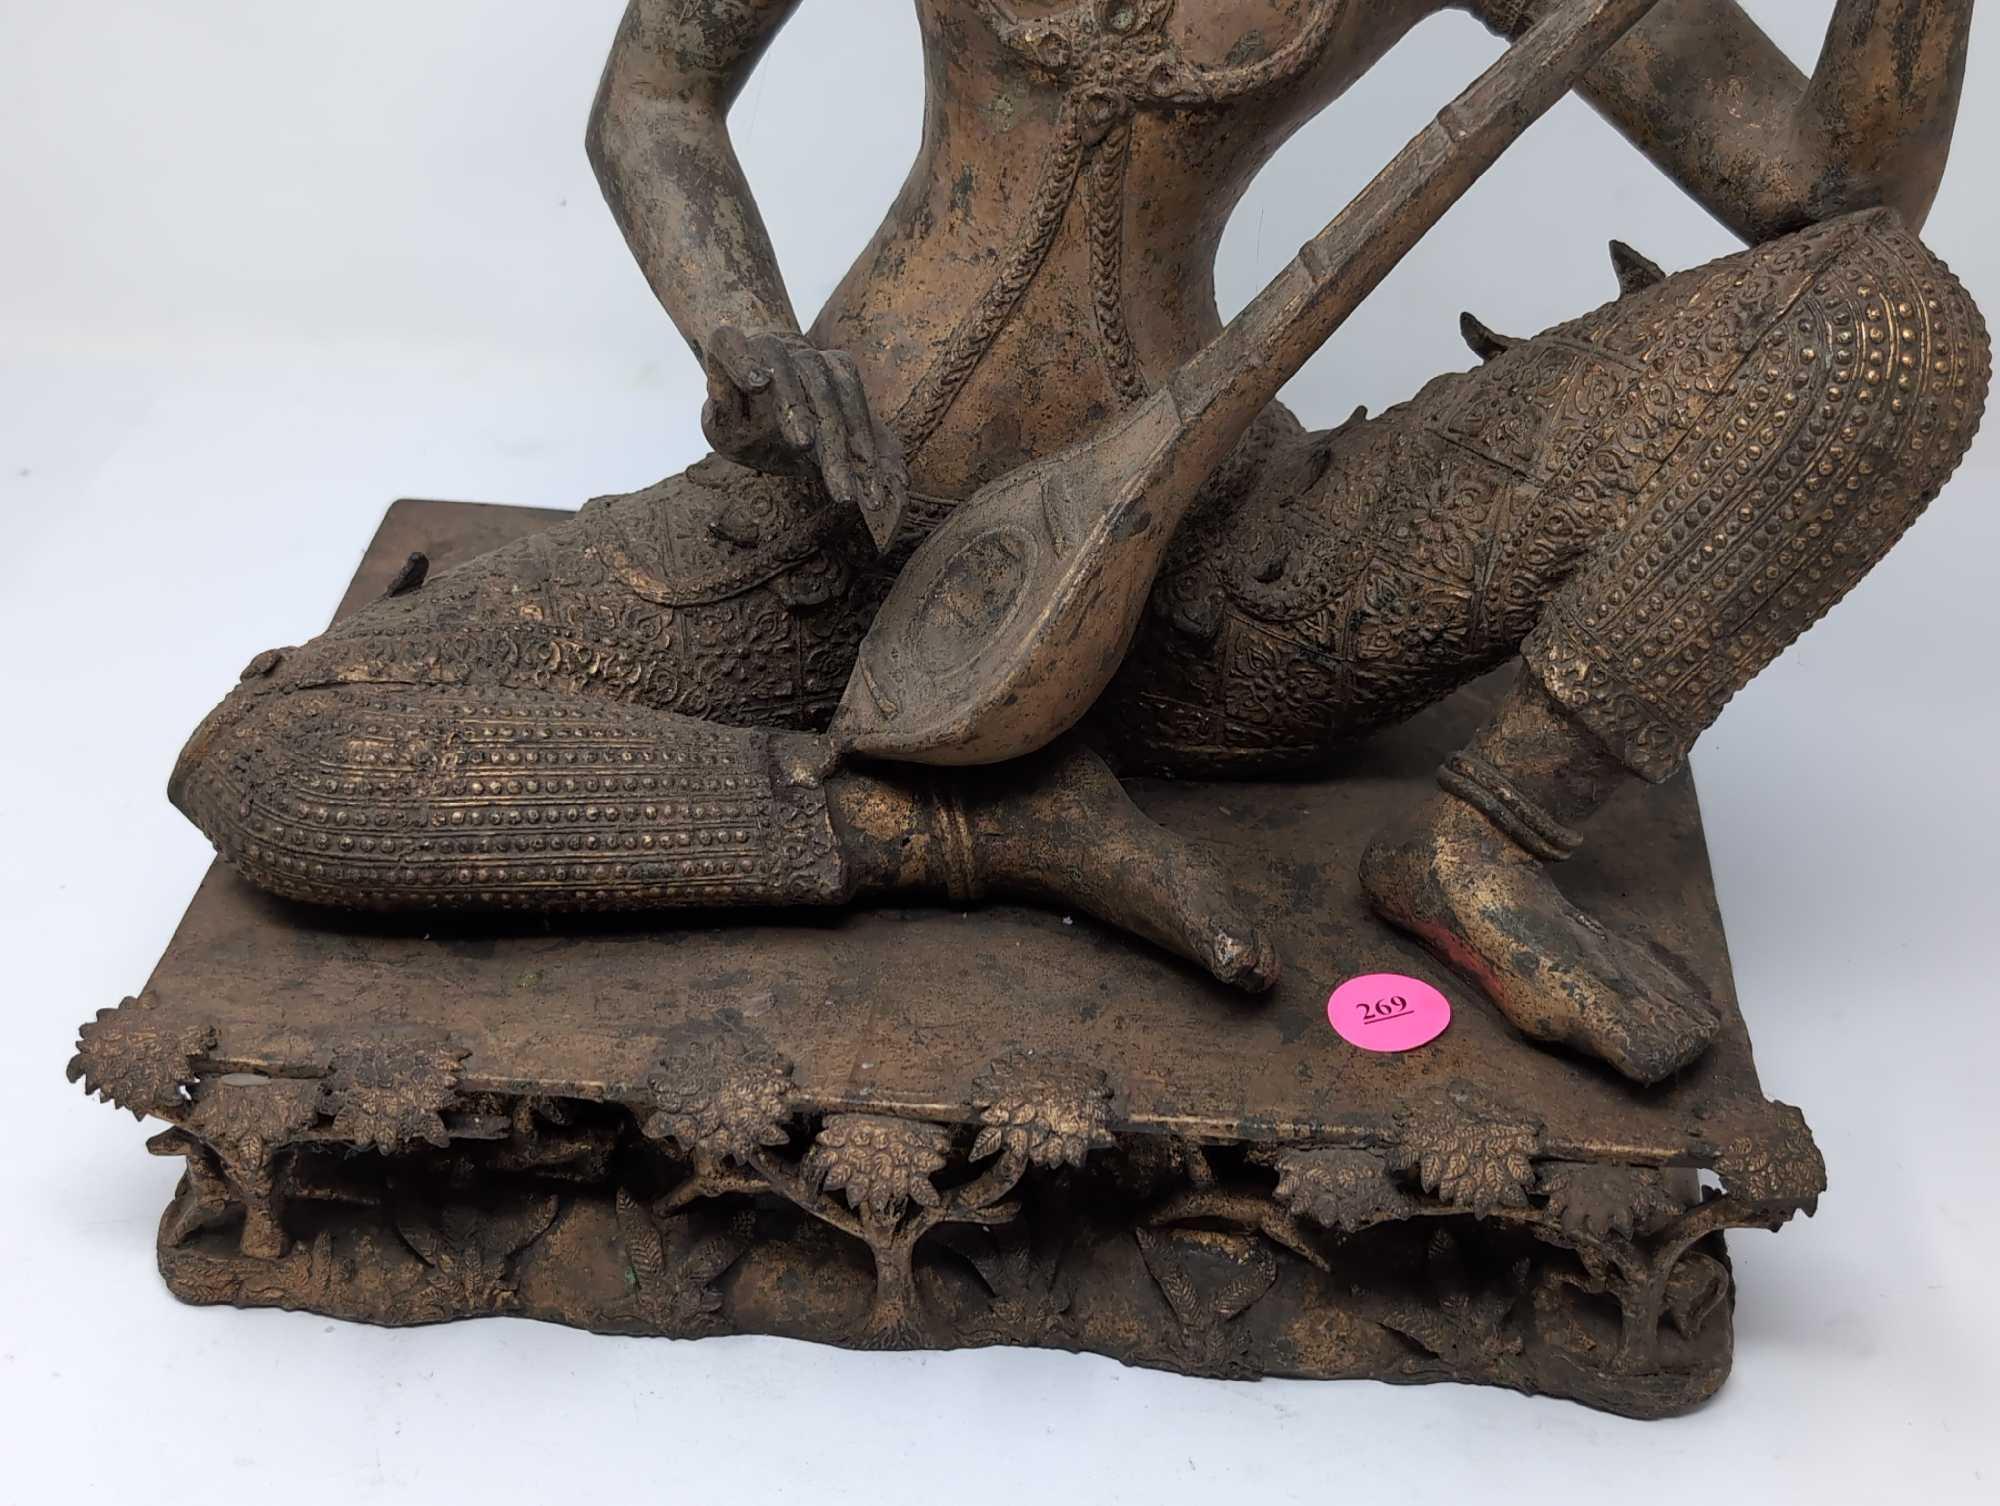 (LR) OUTSTANDING THAILAND GILDED BRONZE STATUE OF SARASWATI PLAYING A VINA. VERY DETAILED. IT